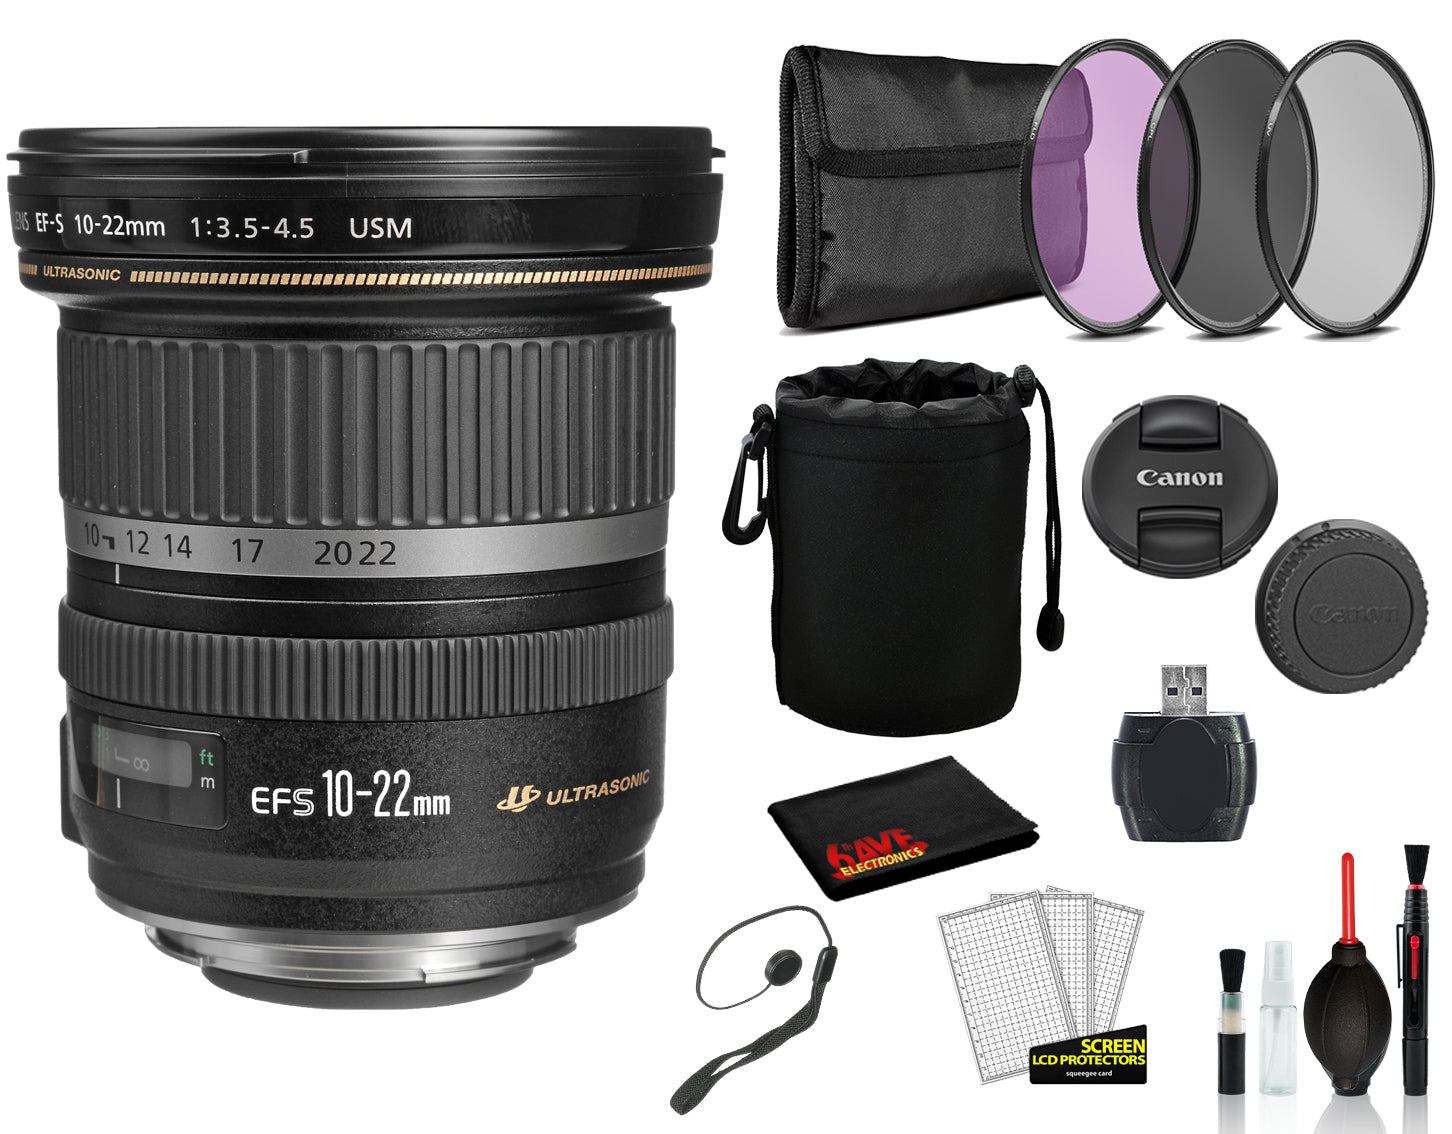 Canon EF-S 10-22mm f/3.5-4.5 USM (9518A002) Lens with Bundle includes 3pc Filter Kit  + Lens Pouch + More